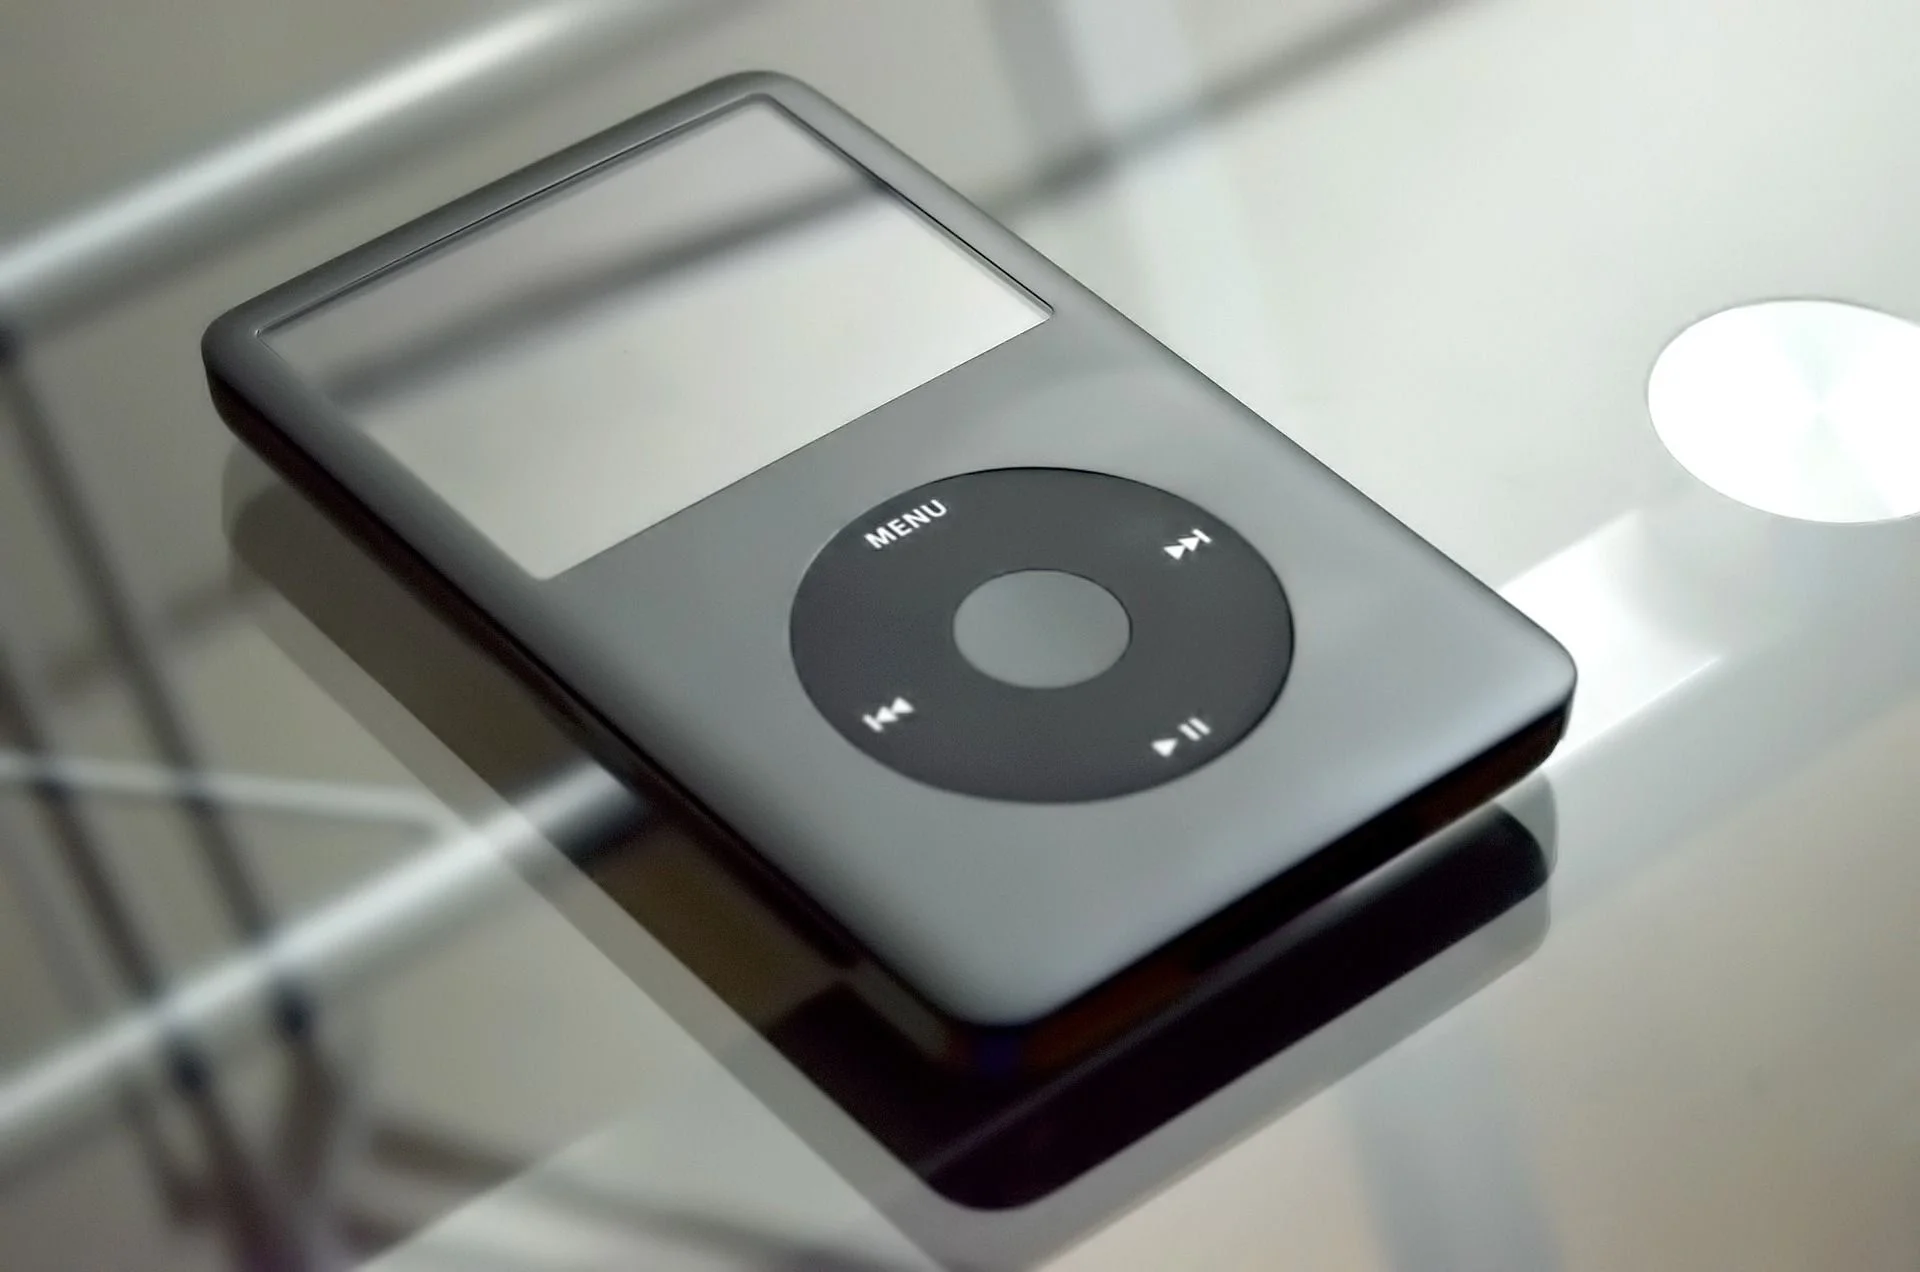 Apple wanted to make an iPhone with an iPod wheel